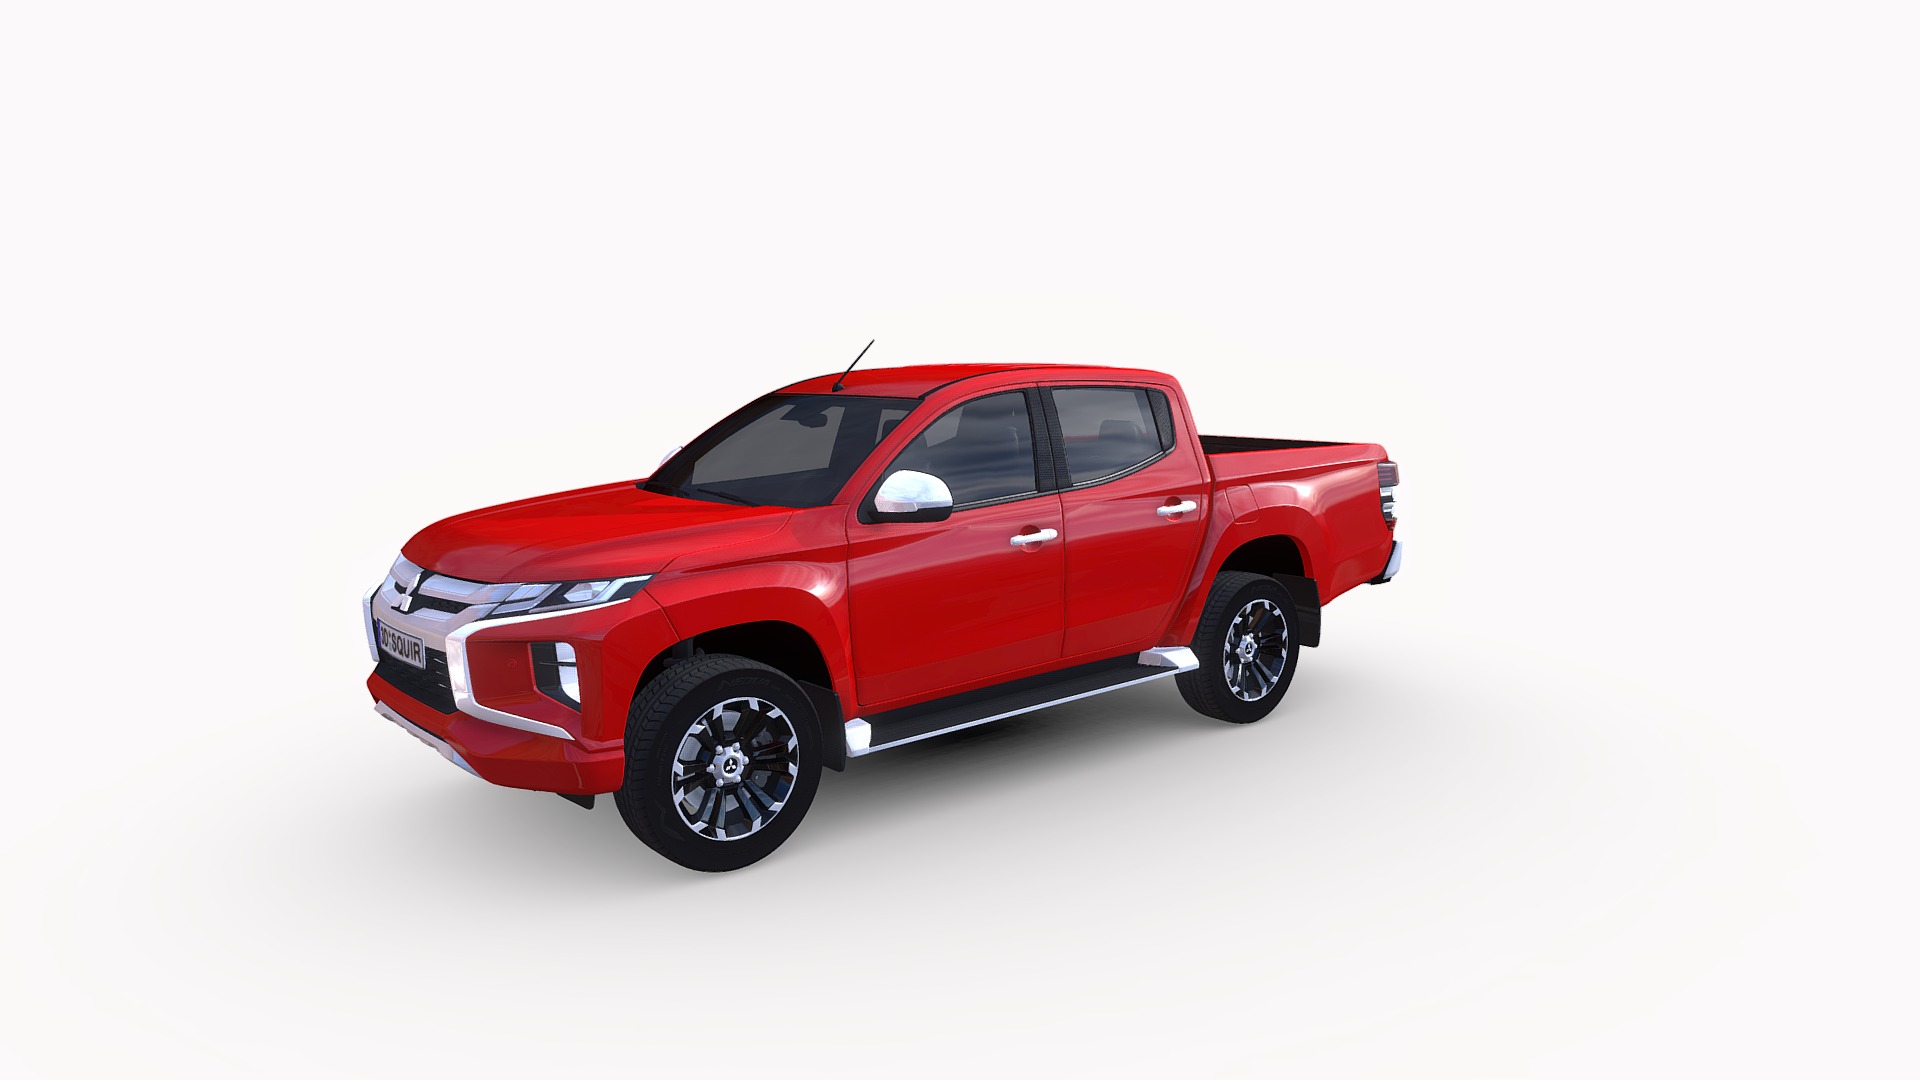 3D model Mitsubishi L200 Crew Cab 2019 - This is a 3D model of the Mitsubishi L200 Crew Cab 2019. The 3D model is about a red car with a white background.